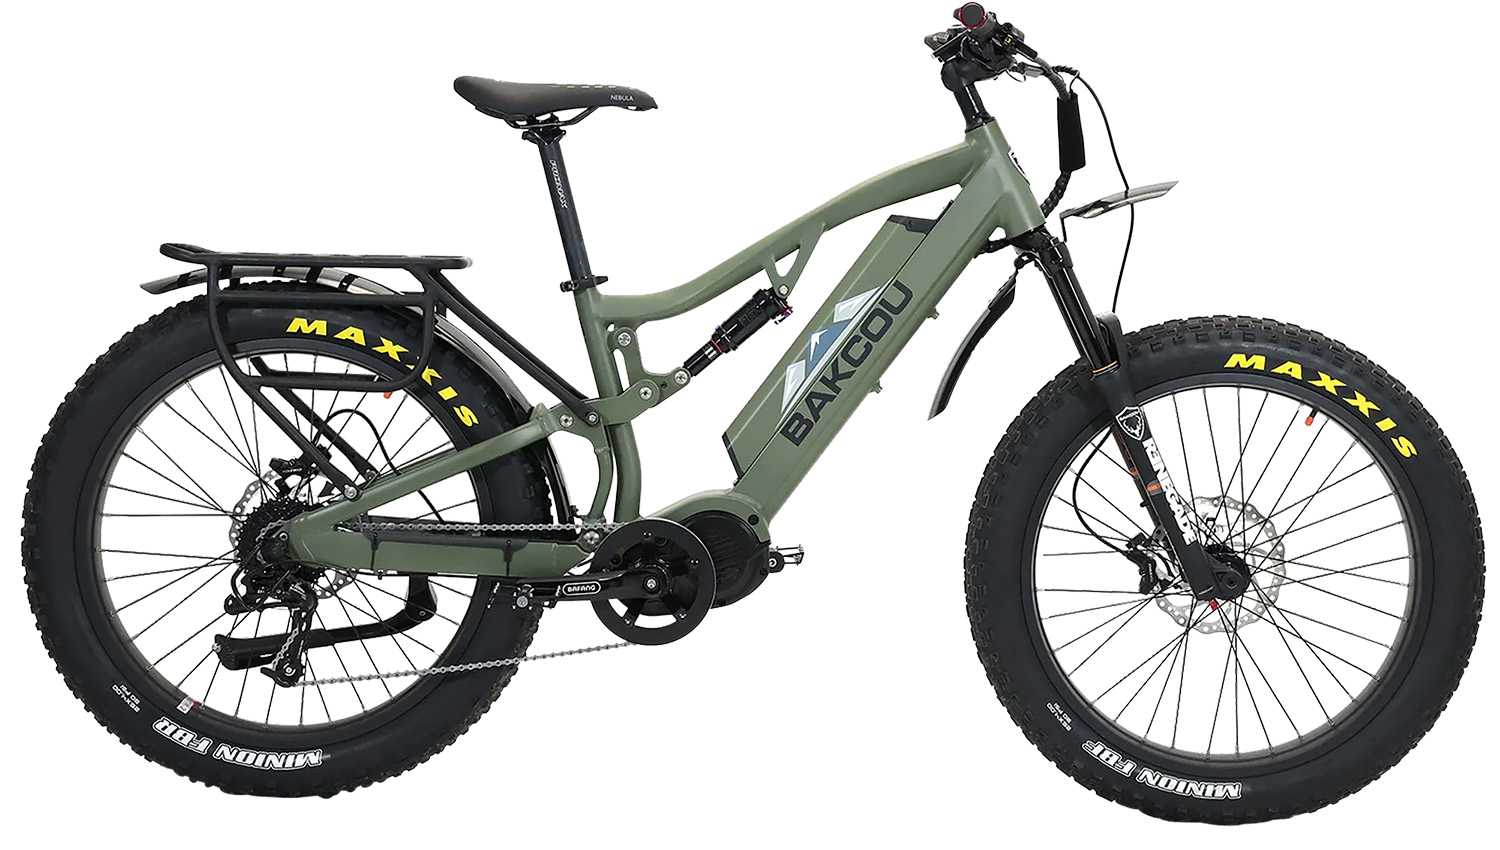 Bakcou E-bikes B-S19-G-B25 Storm 25 Large Matte Army Green 19" W/Stand Over Height Of 30.50" Frame, Sram 9sp, 40T Front